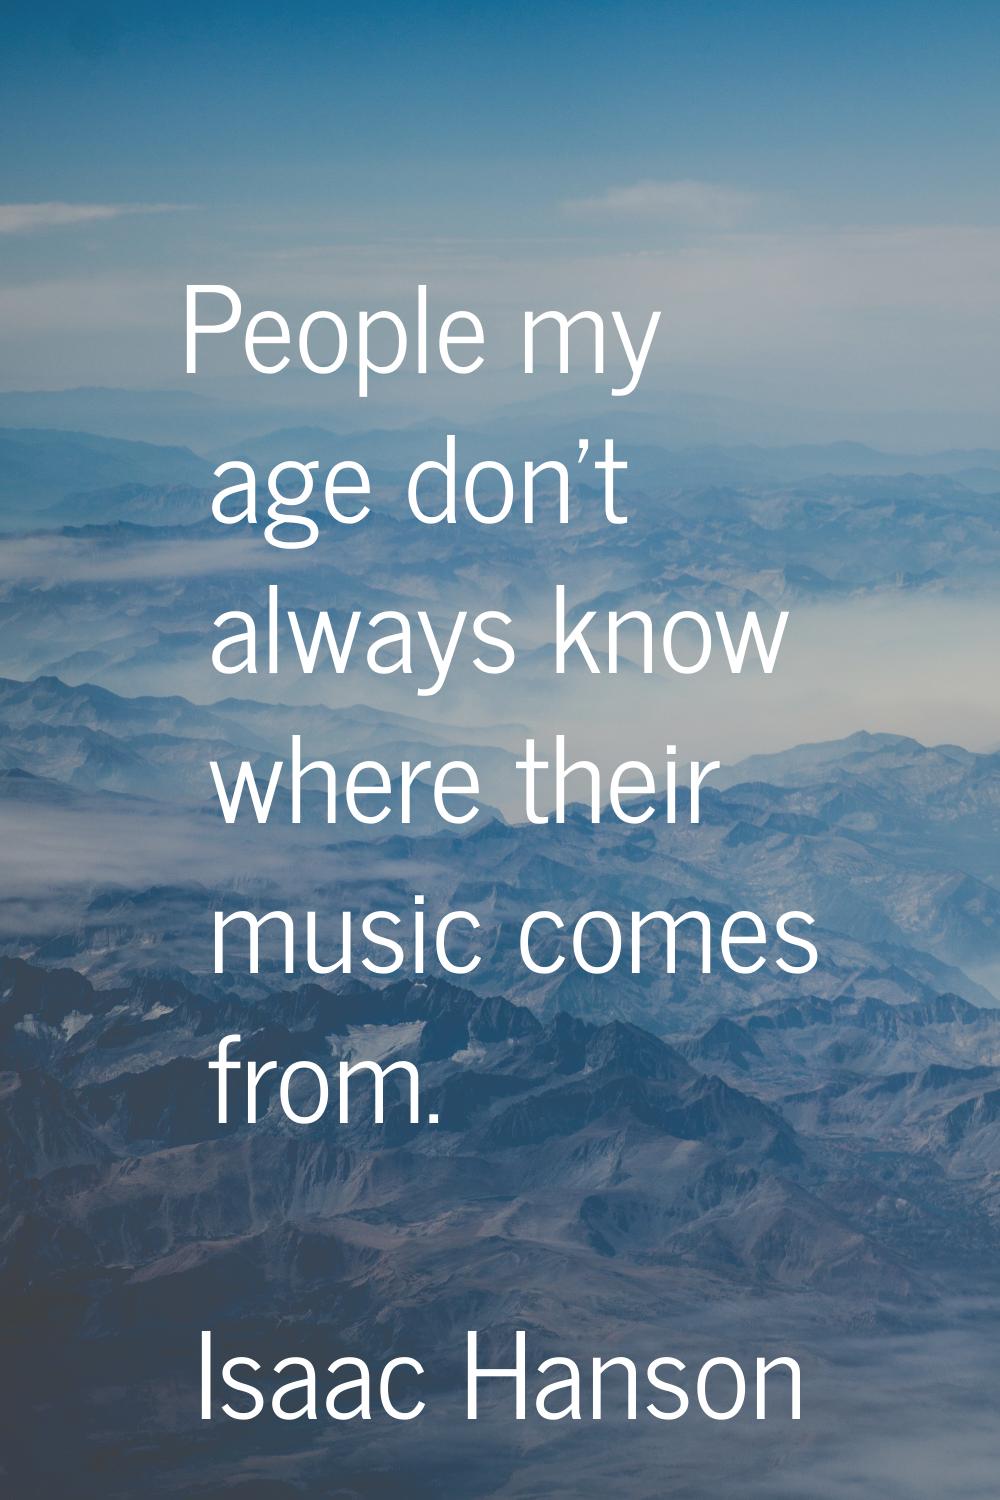 People my age don't always know where their music comes from.